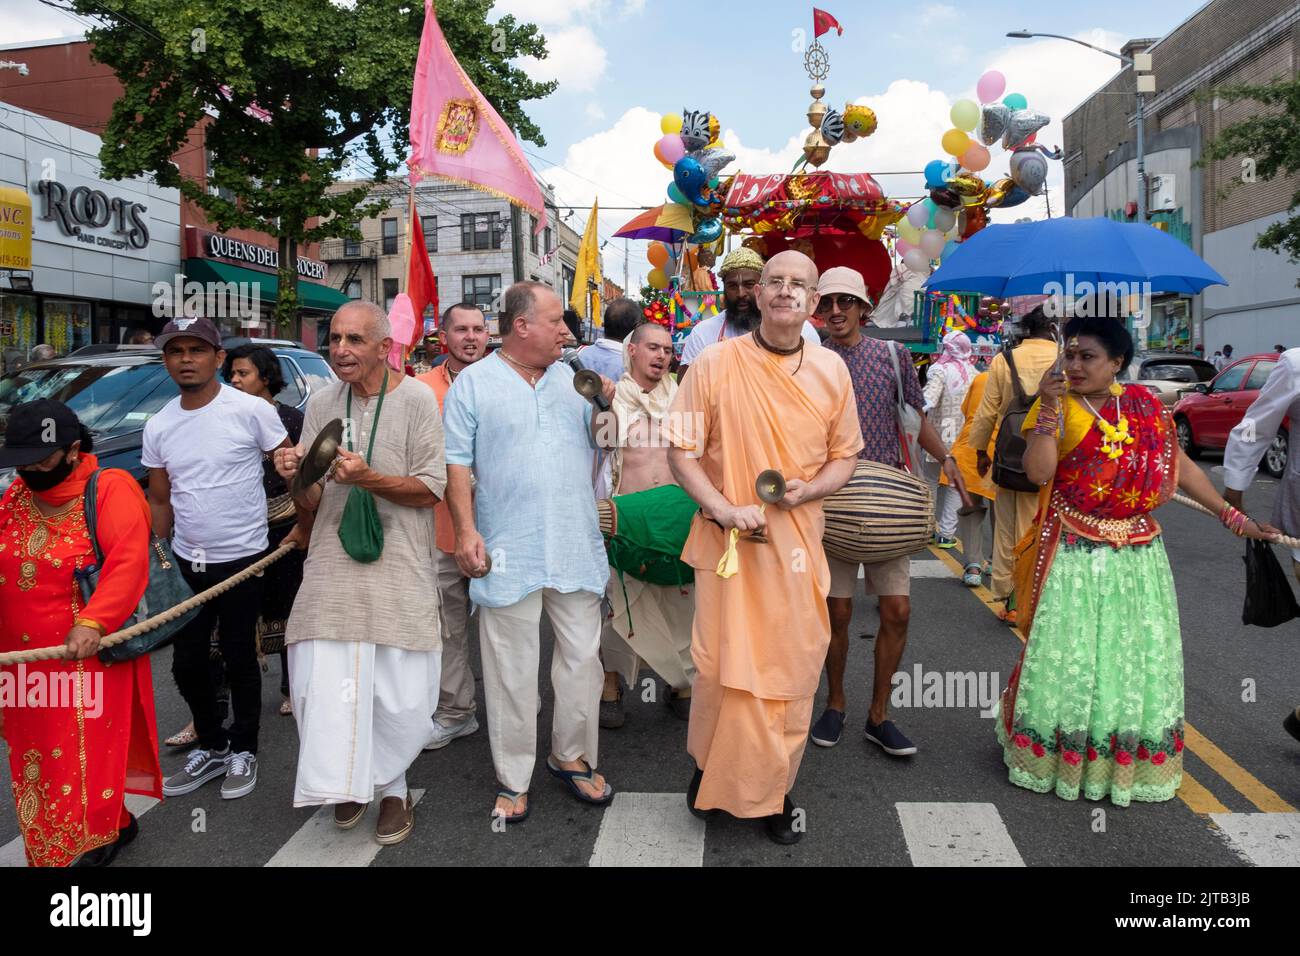 At the start of the Queens Ratha Yatra Parade, Hindu men & women play hand cymbals and drumsl. On Liberty Avenue in Richmond Hill, Queens, NYC Stock Photo